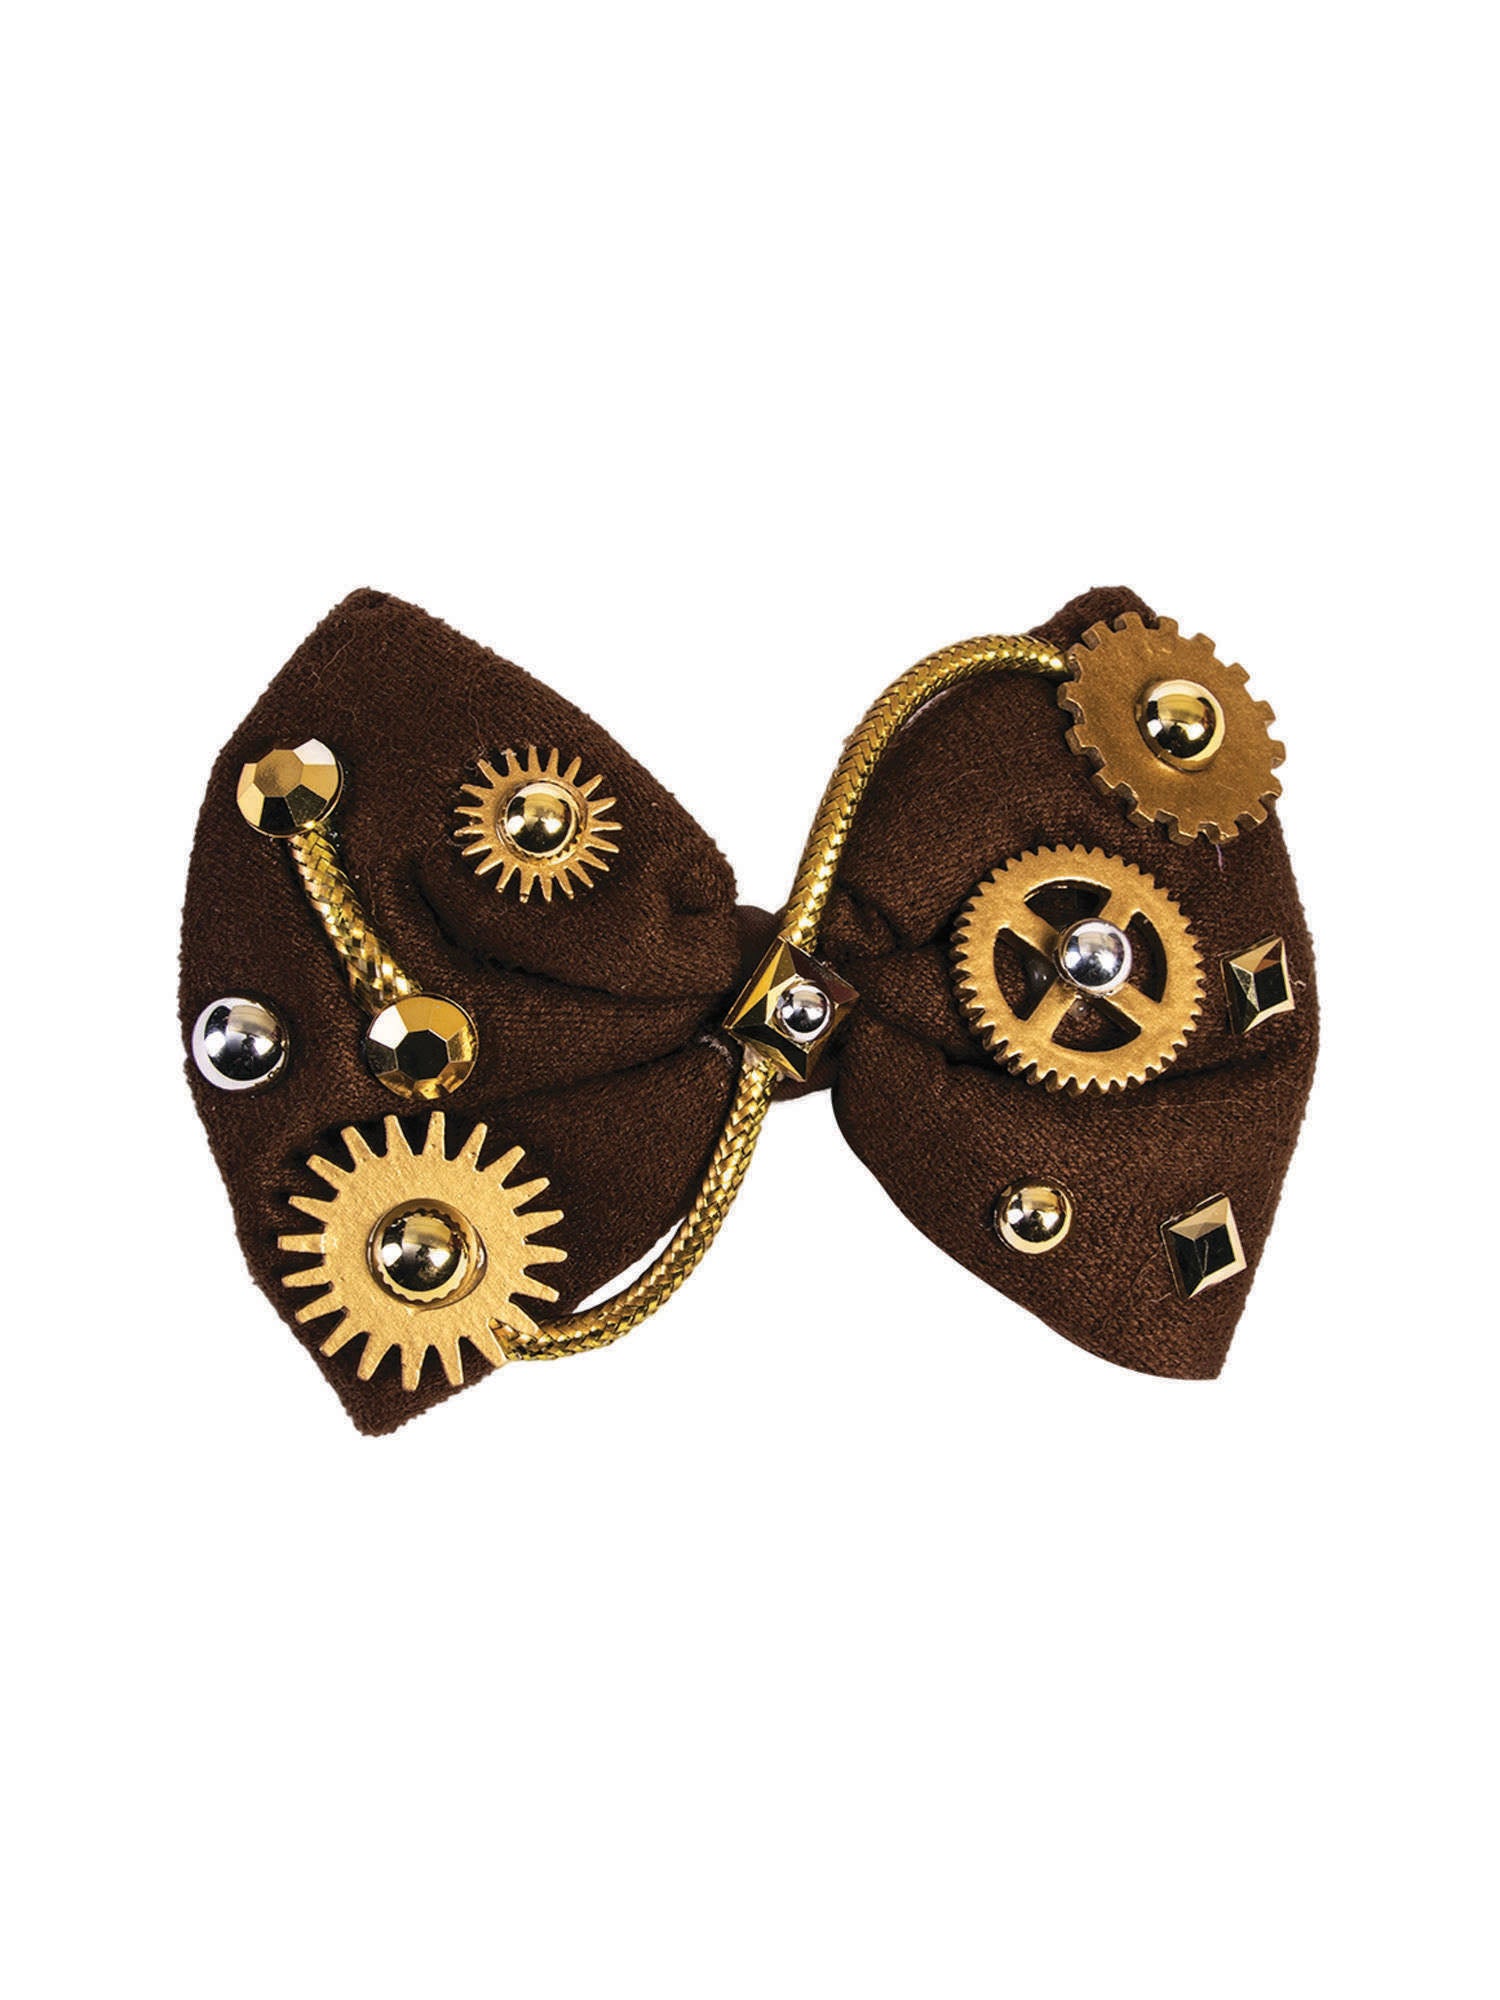 Steampunk, Multi, Generic, Accessories, One Size, Front